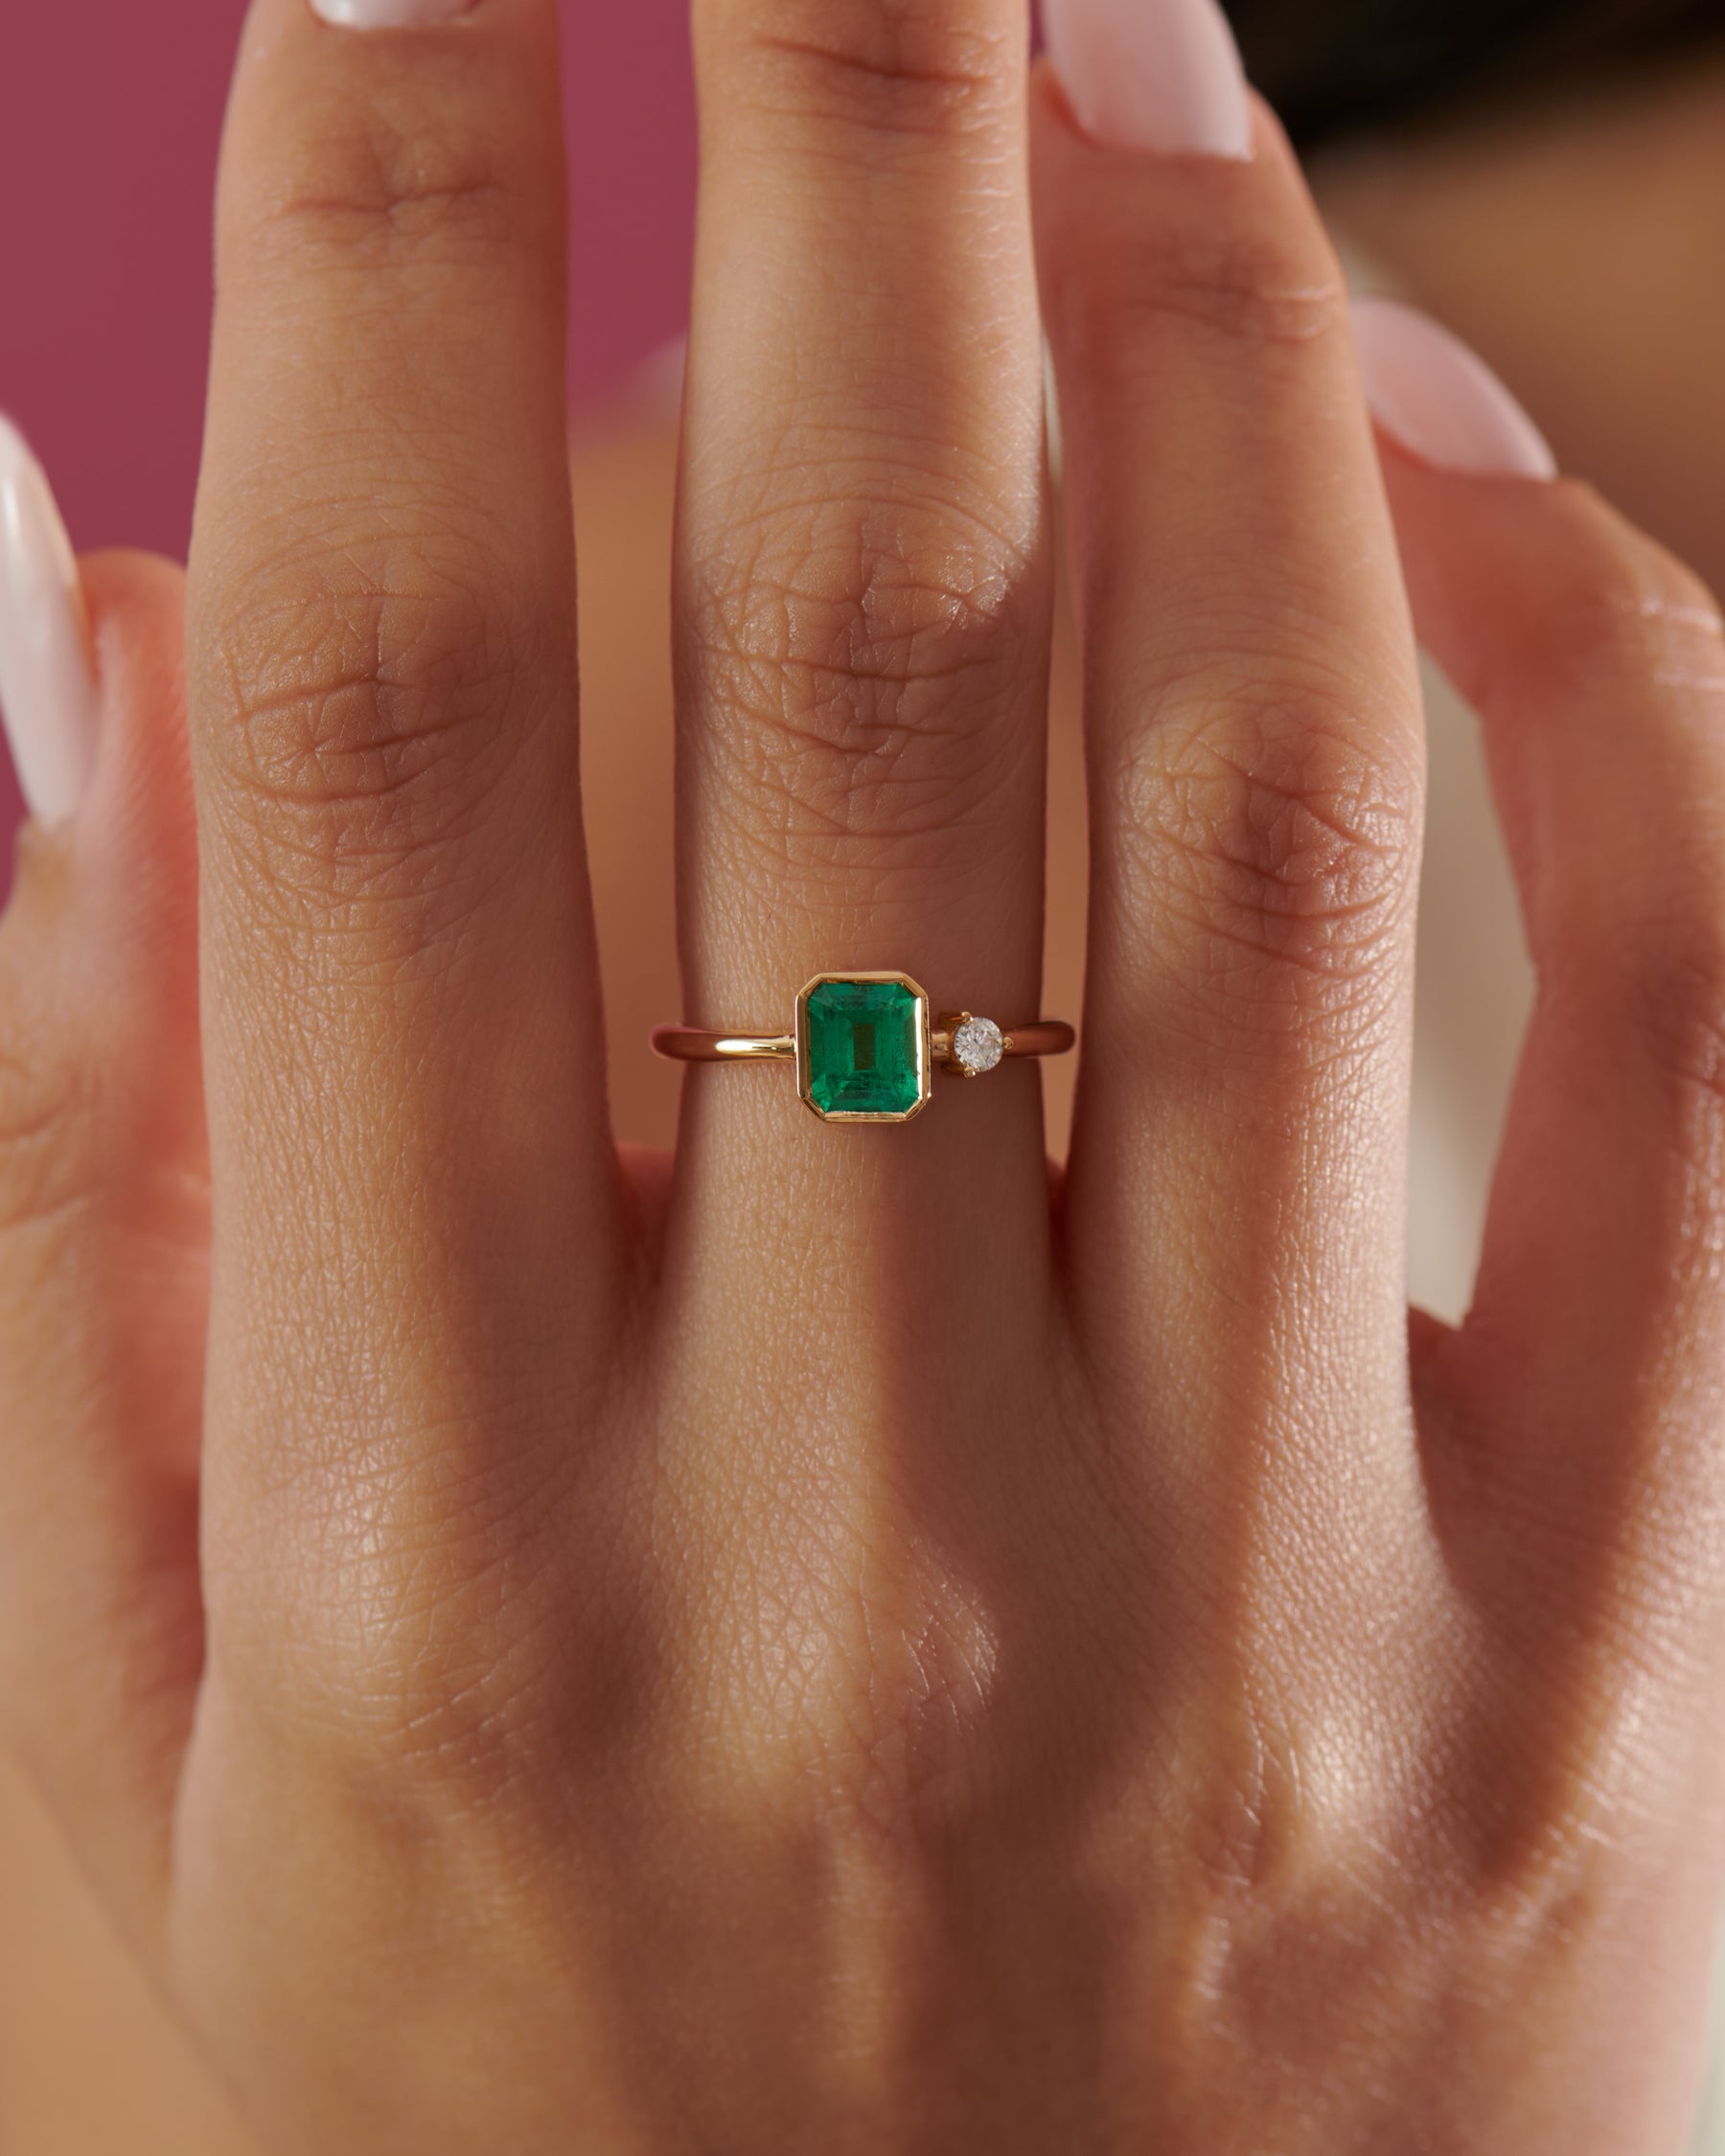 Emerald Engagement Ring with A Small Diamond - Asymmetric Emerald